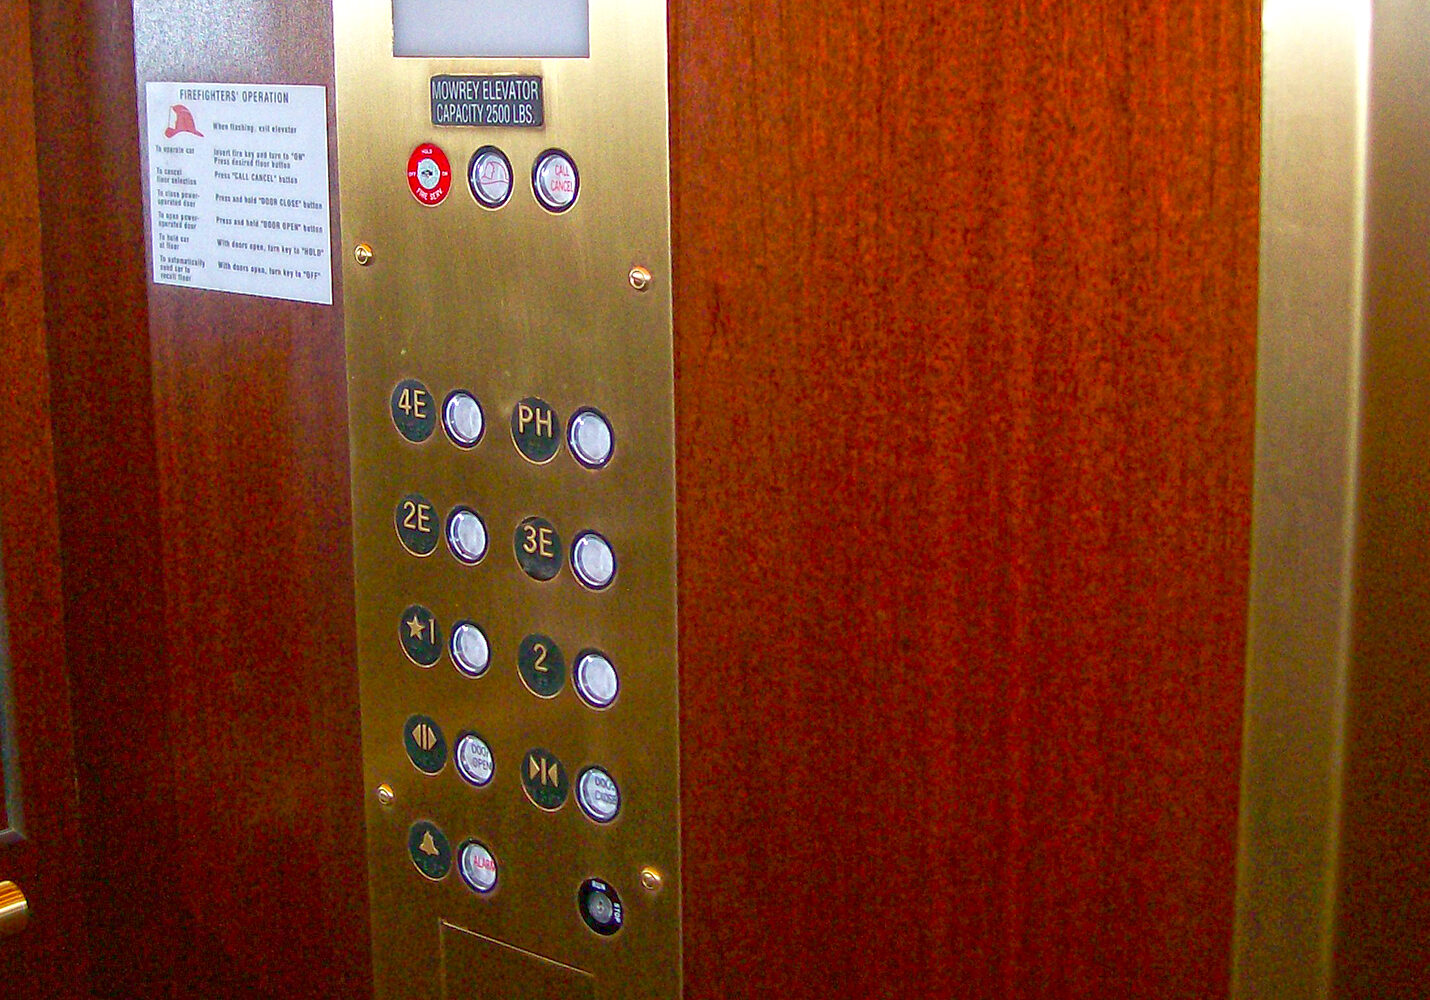 Bronze Elevator Refinishing and Resurfacing - Casellas Refinishing - Building Surface Restoration - About Casellas Refinishing Florida - Gallery of Refinishing and Restoration Projects - Casellas Refinishing - Elevator Repair and Service in Loxahatchee, Royal Palm Beach, Boca Raton, Jupiter, West Palm Beach, Palm Beach County and All of South Florida.